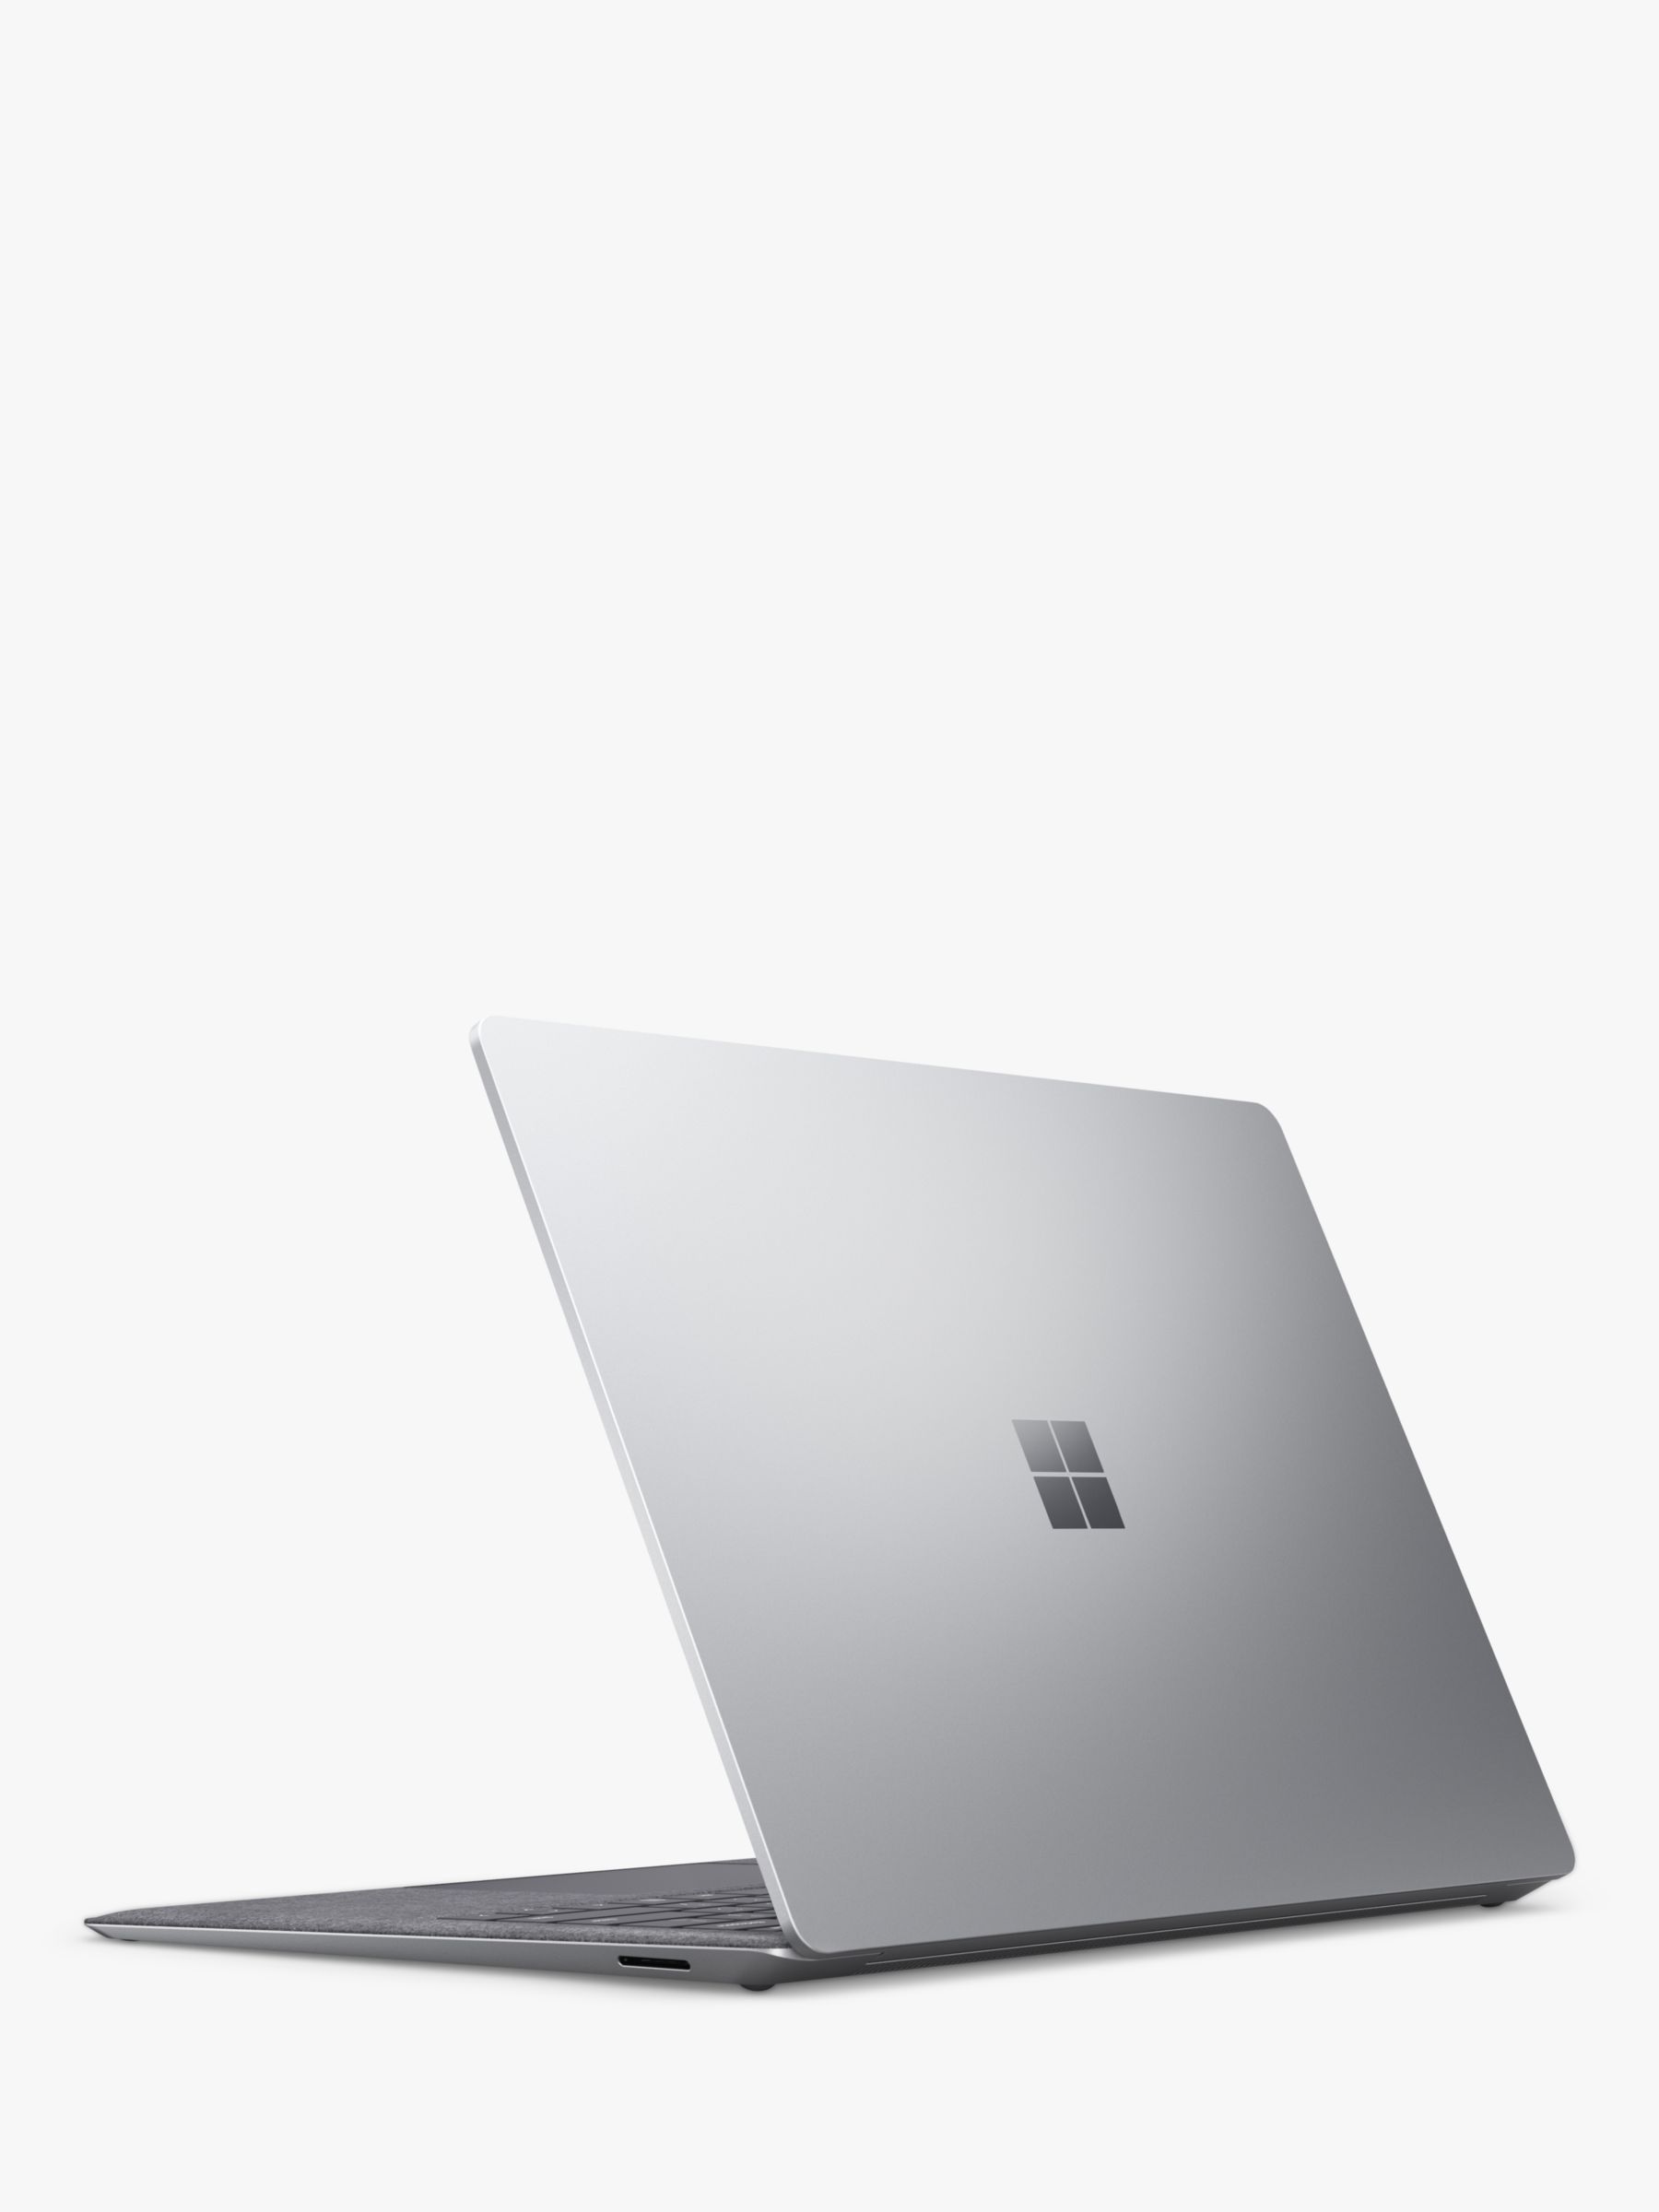 Surface Laptop 5 hands-on: AMD out, Thunderbolt in